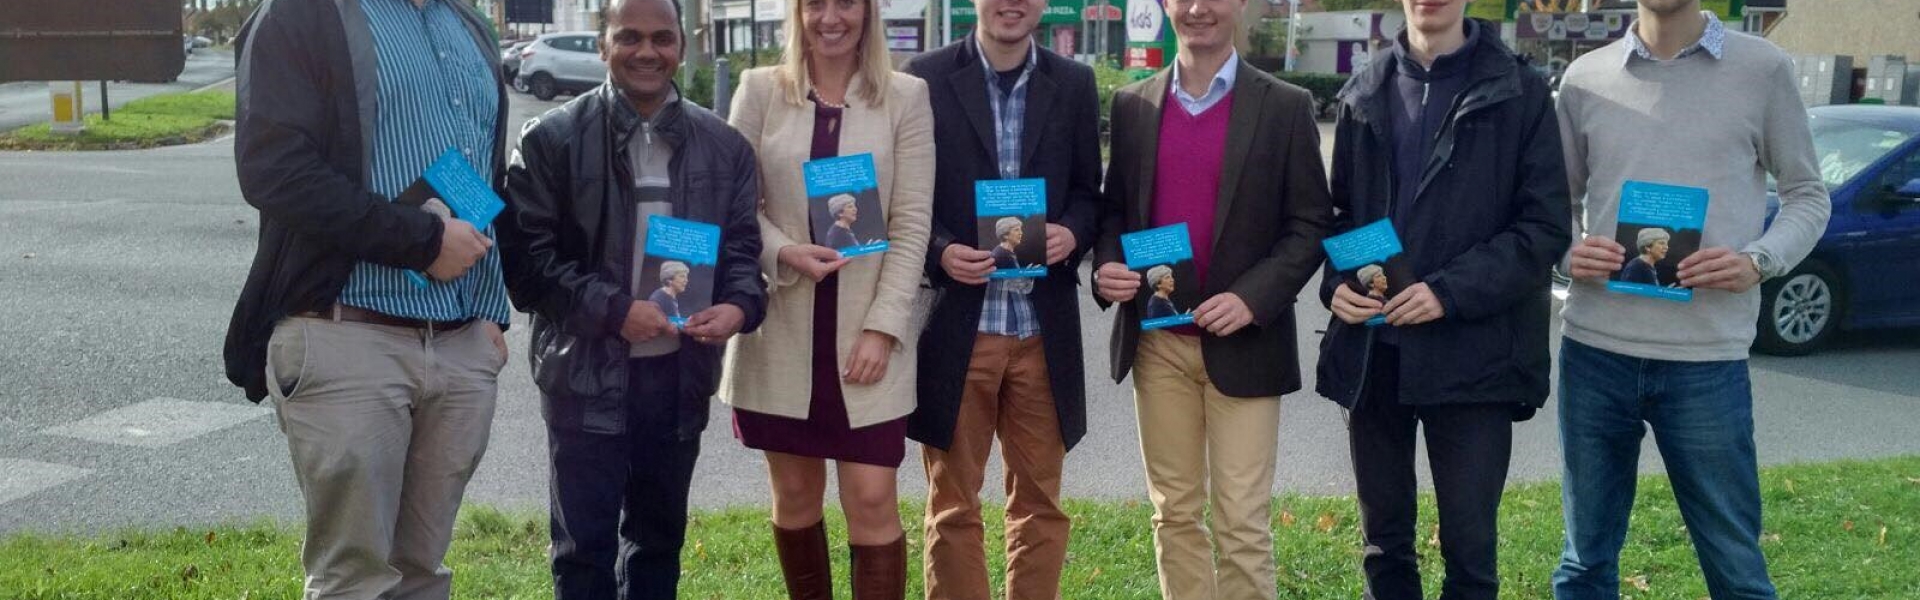 Oxford East Conservatives